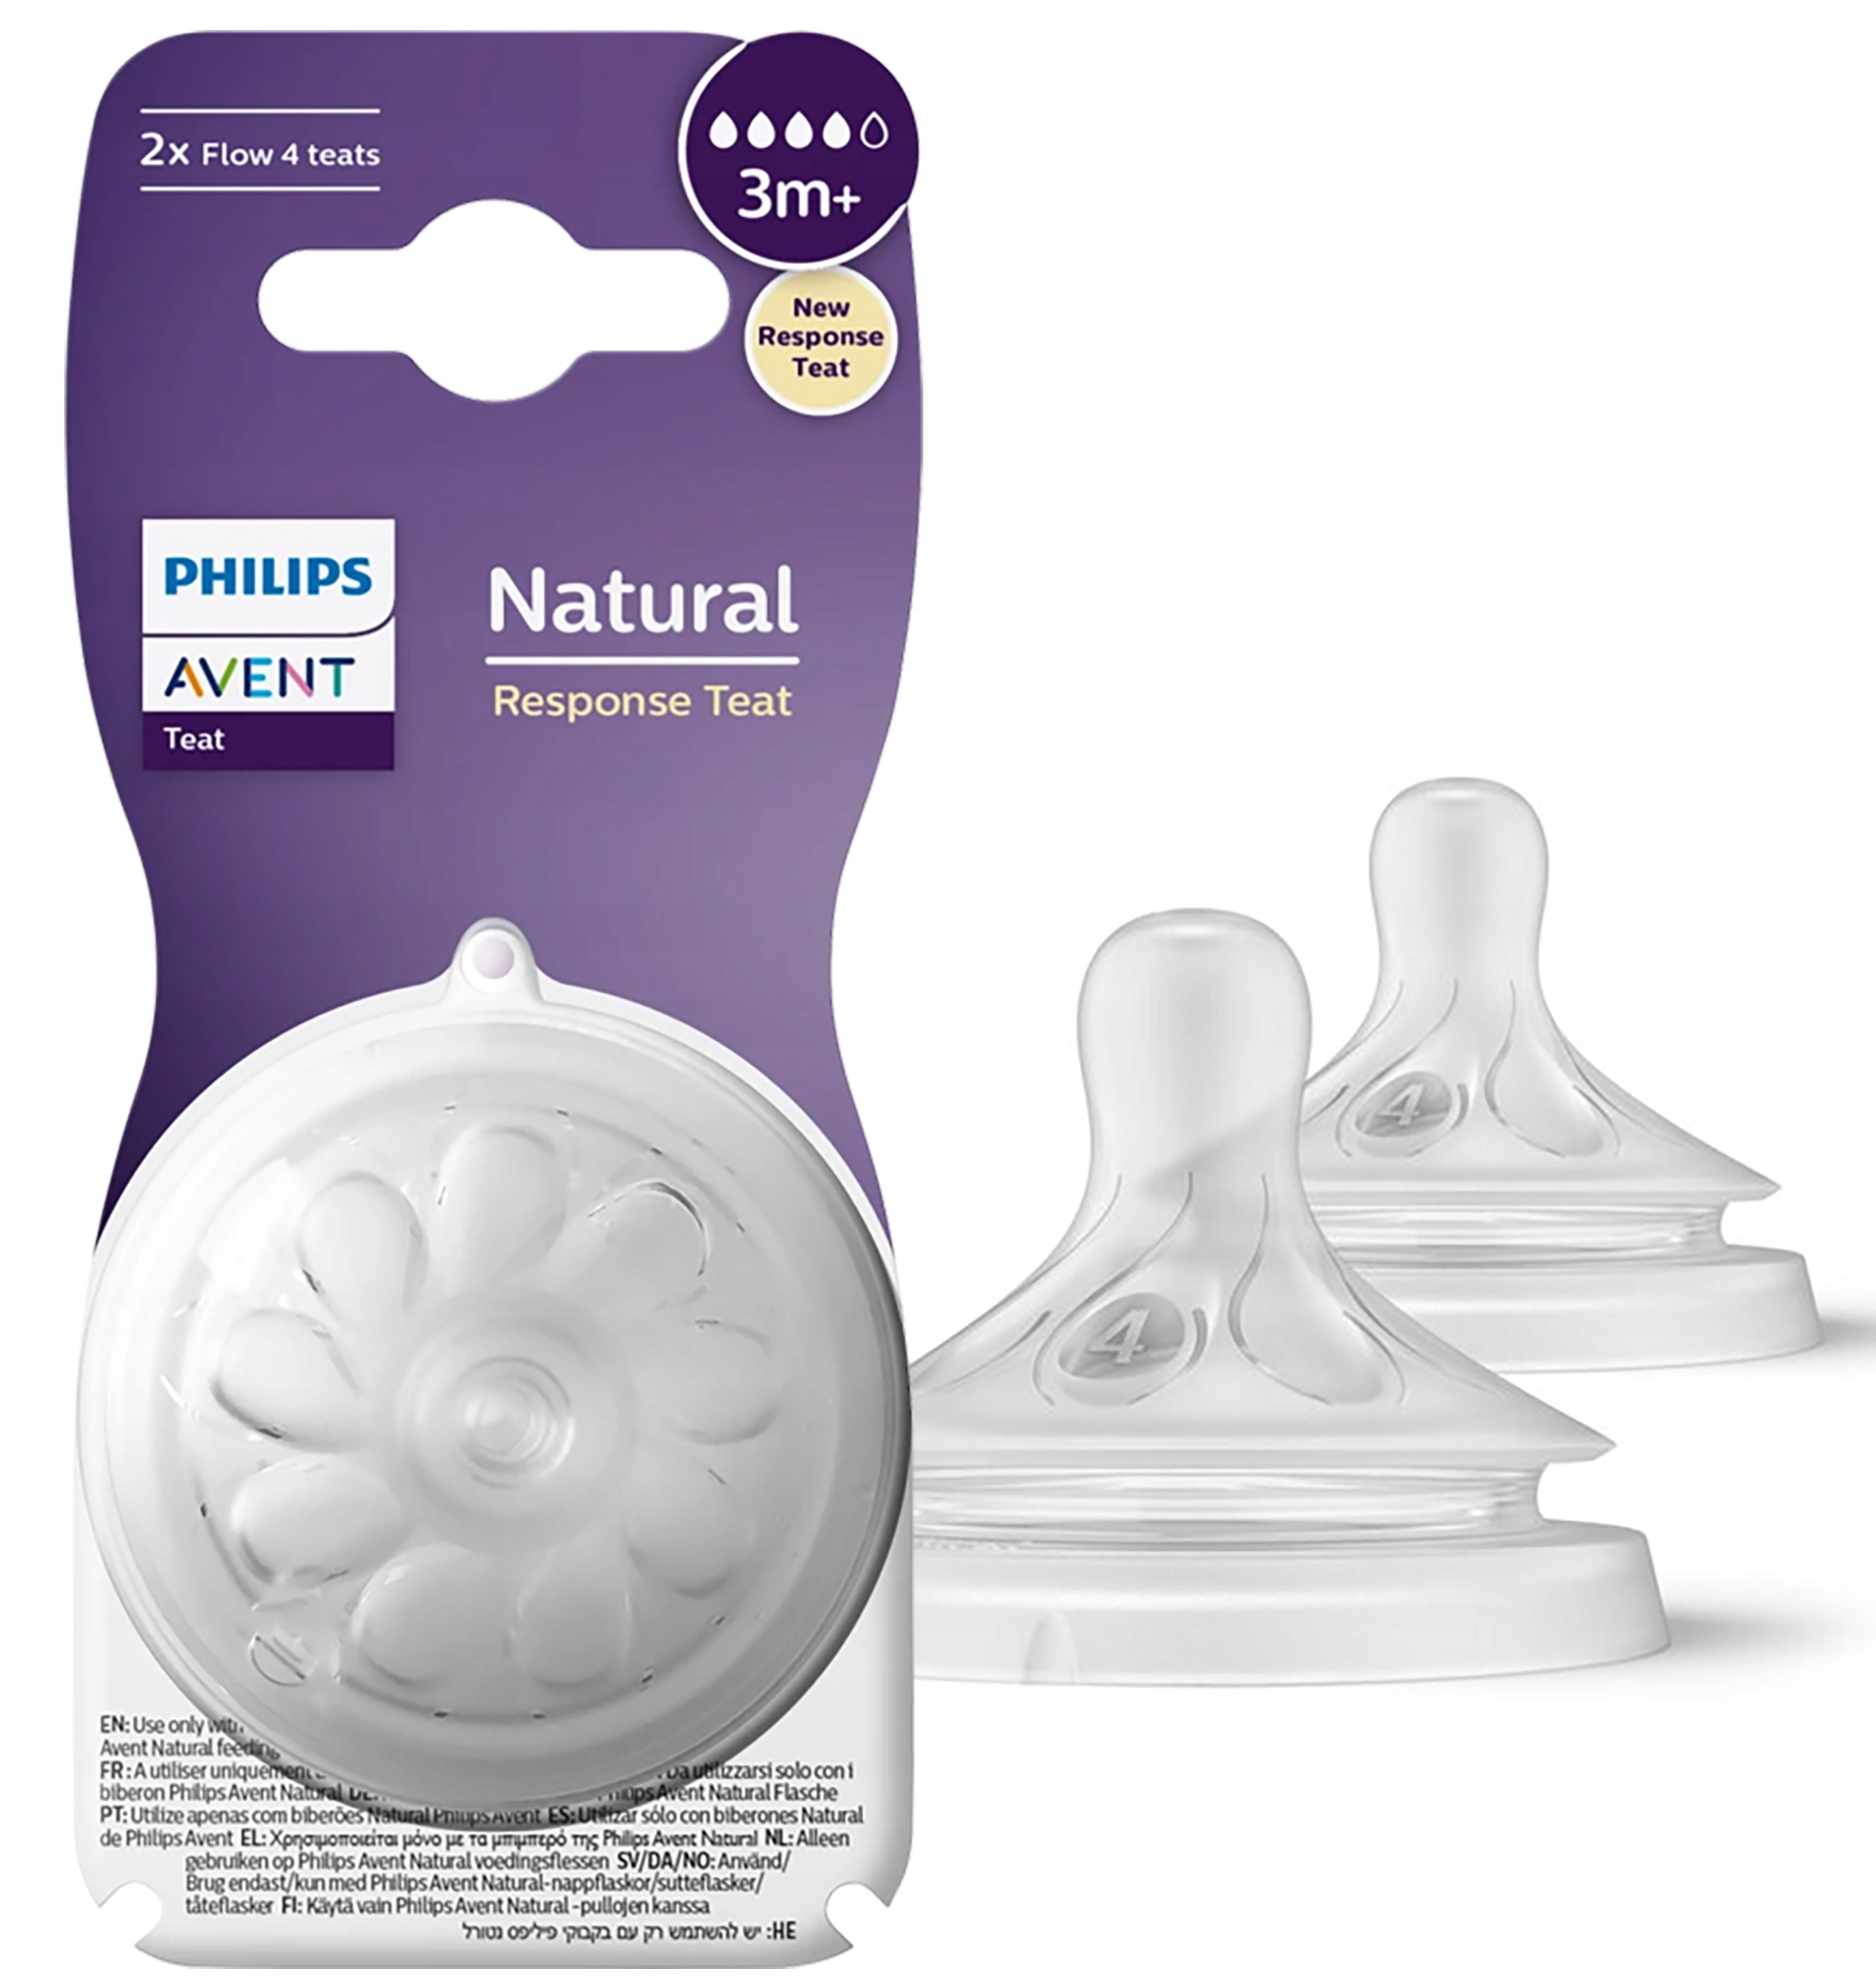 Natural response philips. Philips Avent natural response соска. Соска Авент натурал 3м. 1m+ Avent natural response.